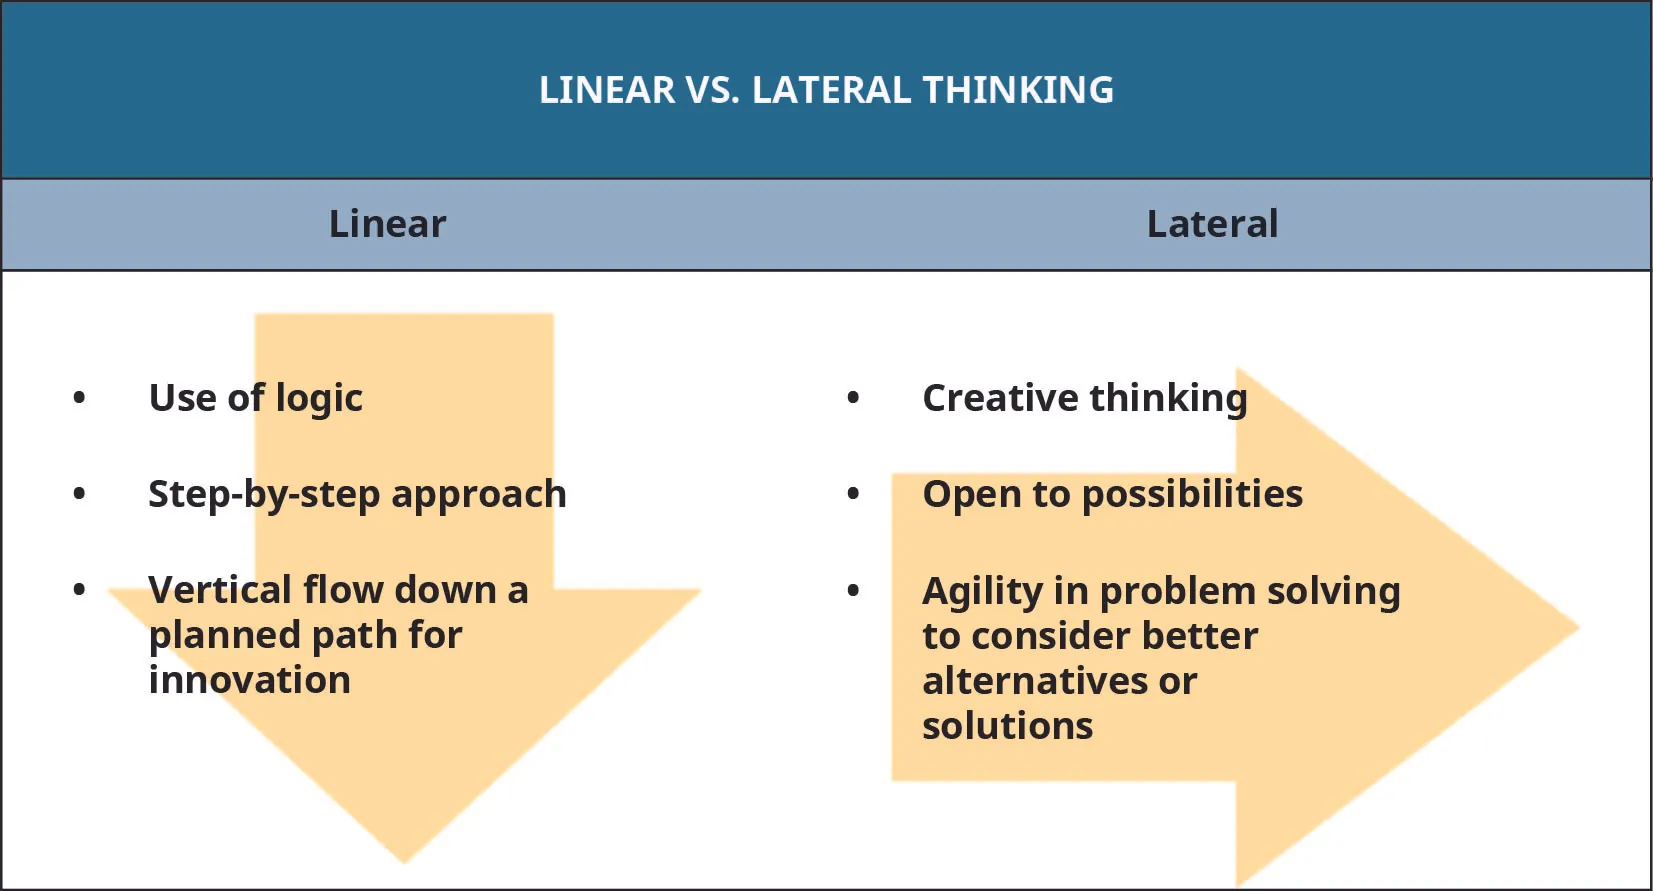 Linear thinking involves the use of logic, a step-by-step approach, and vertical flow down a planned path for innovation. Lateral thinking is creative thinking that is open to possibilities and uses agility in problem solving to consider better alternatives or solutions.